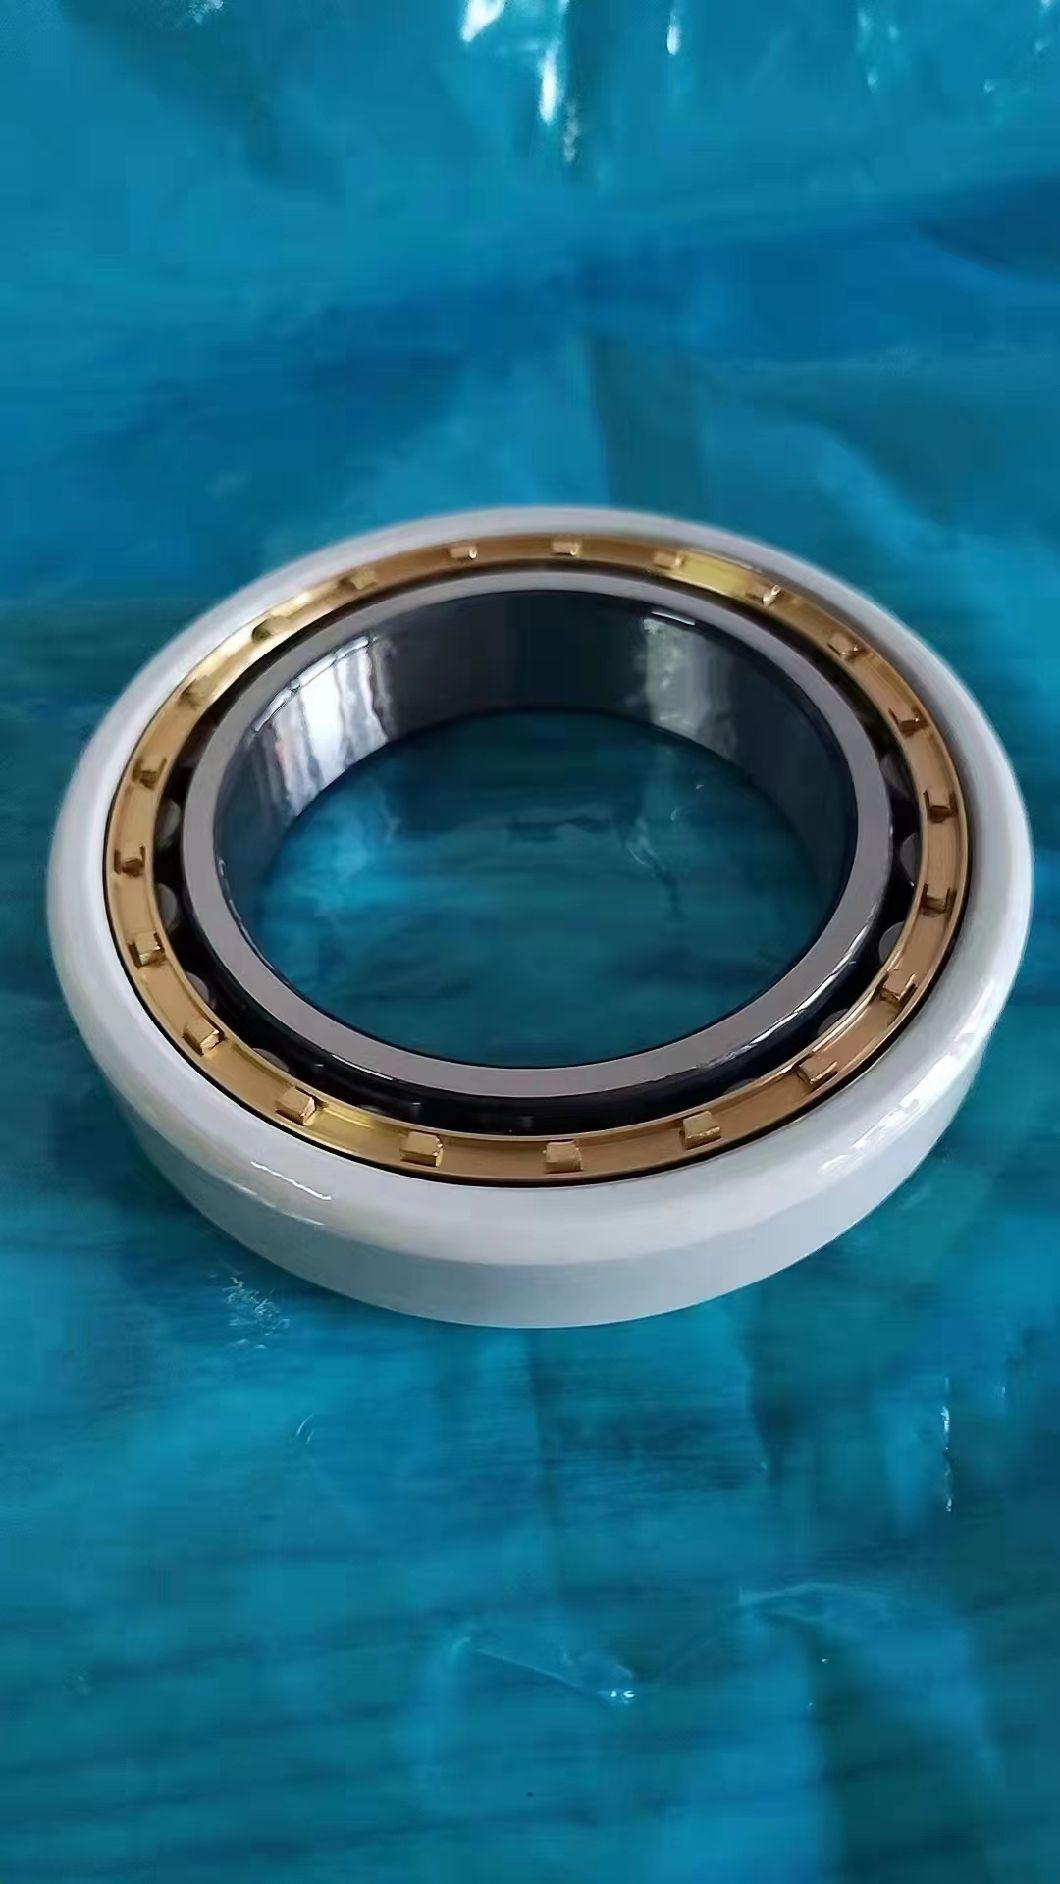 Cylindrical Roller Bearing Nu228becmc3vl2071 Insulation Bearing with a Ceramic Coating and a Preparation Method Belongs to Technical Field of Rolling Bearings